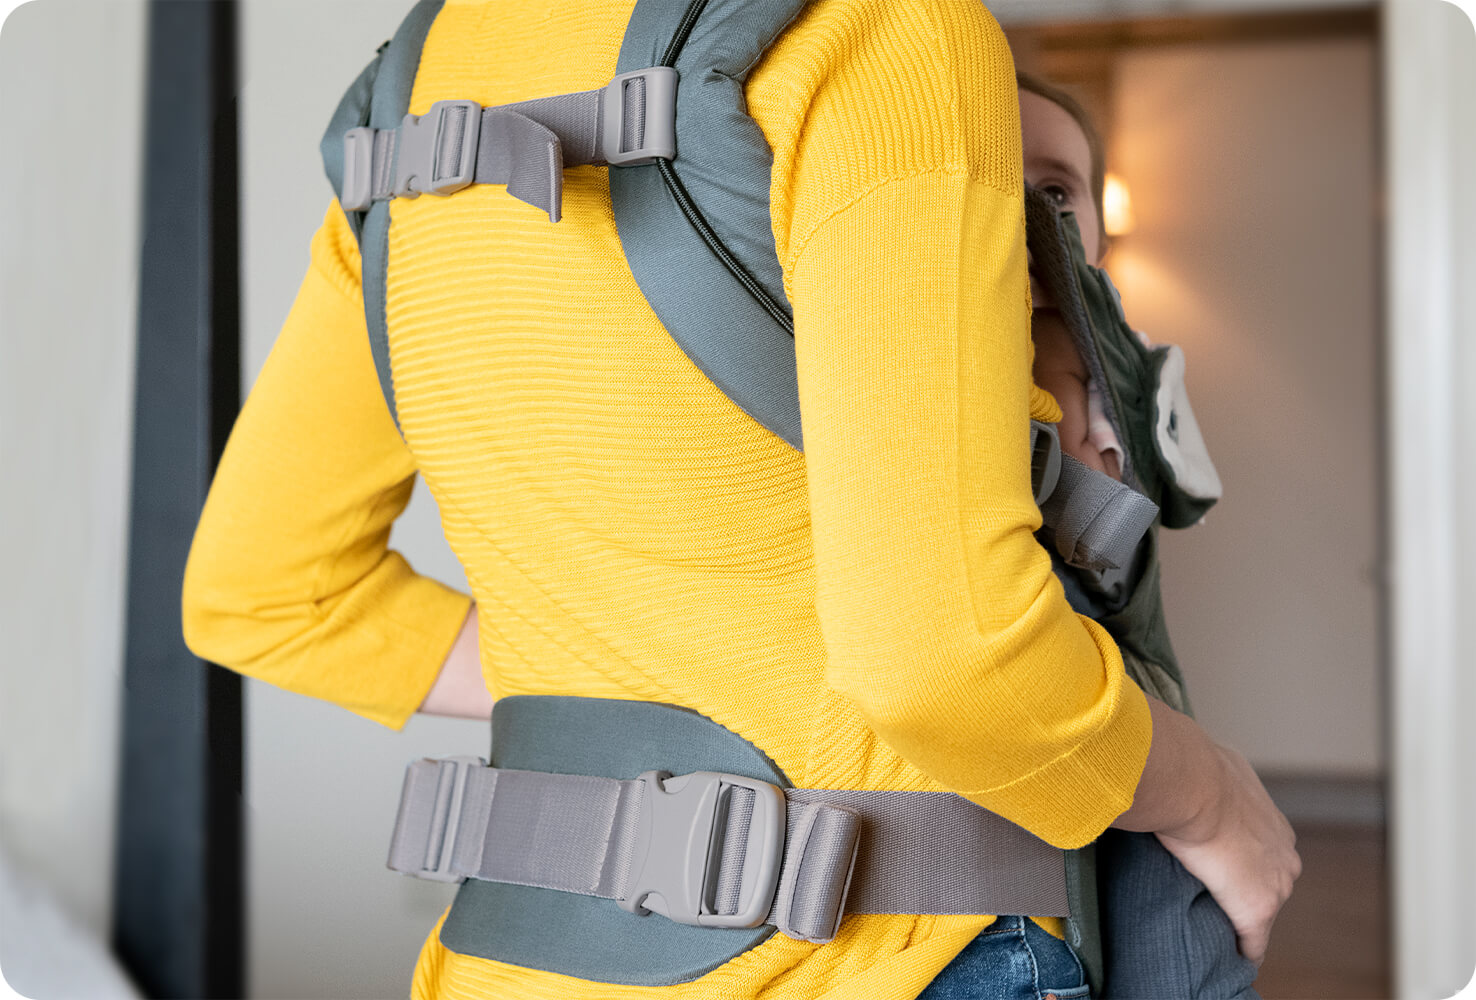  A mum carrying baby in a blue Joie Savvy 4in1 baby carrier, shown from the back